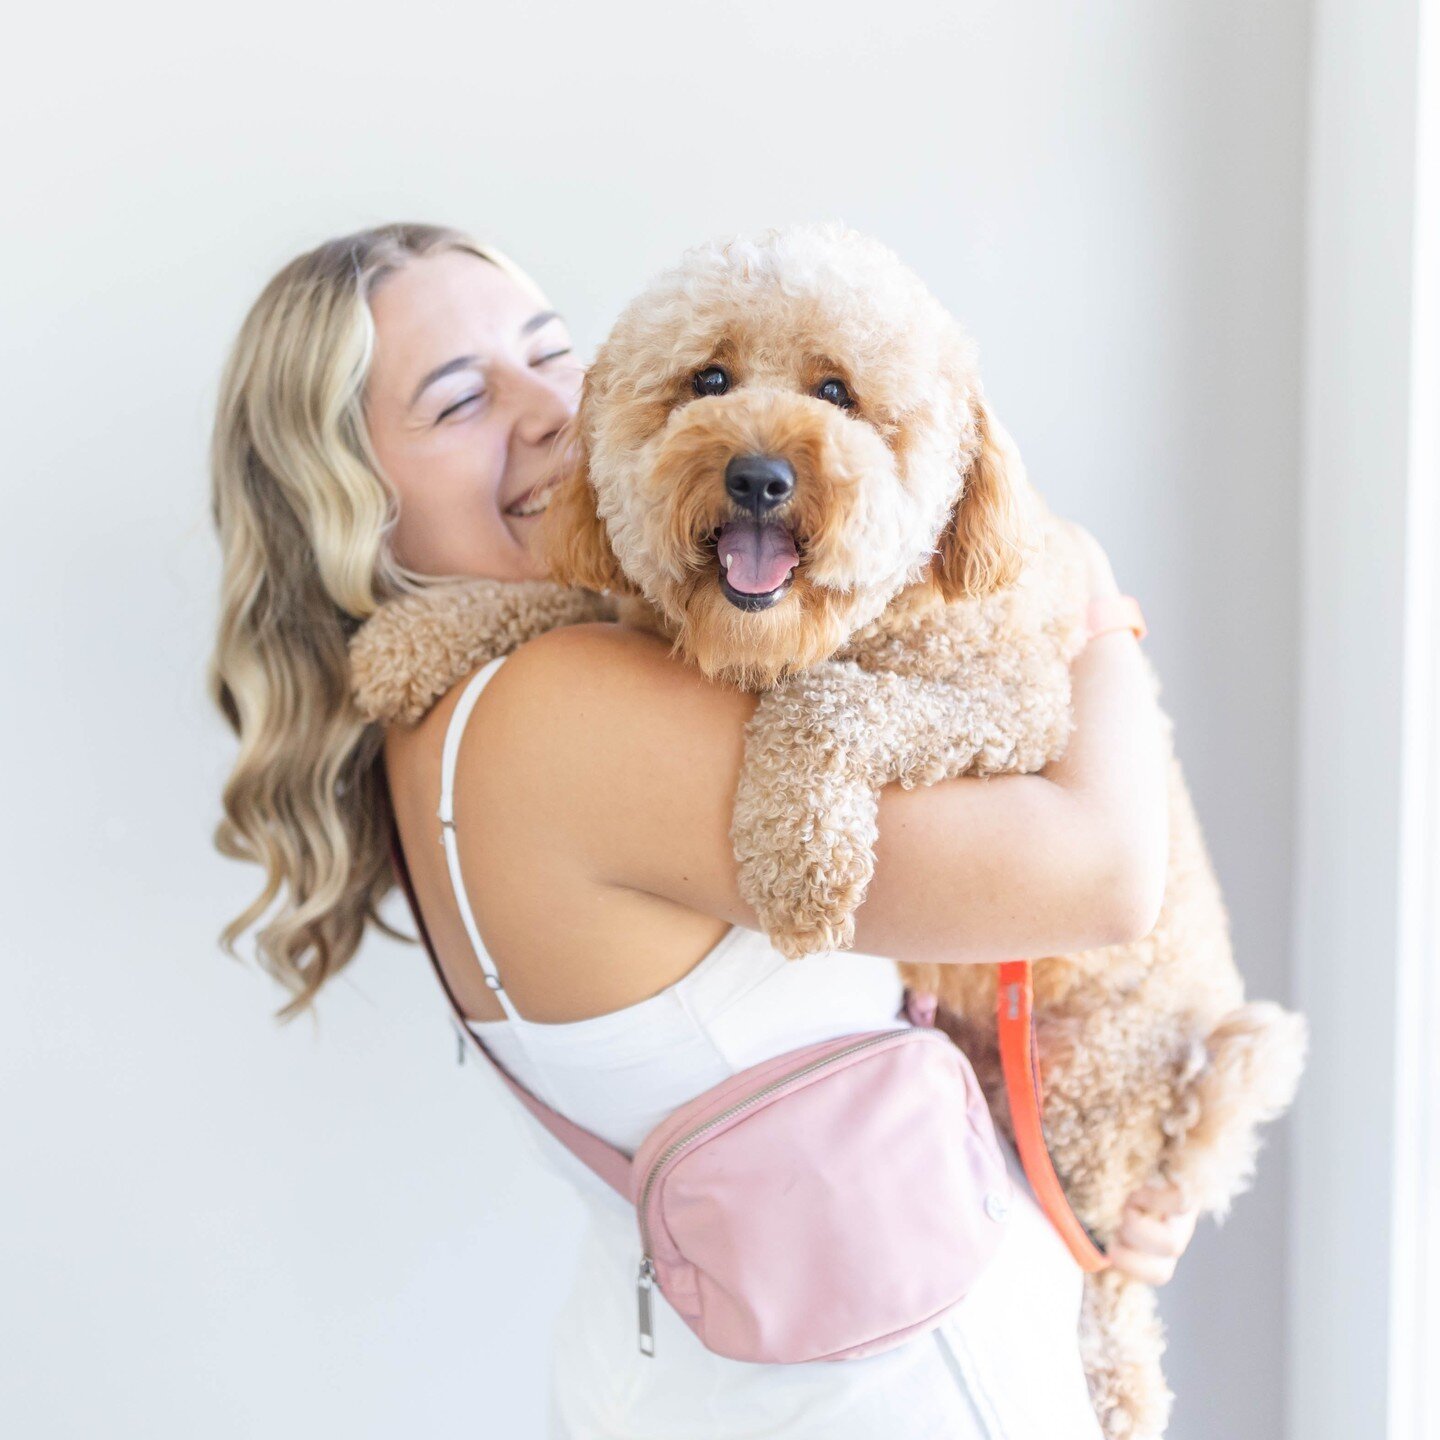 Get ready for all the dog pics today! It&rsquo;s National Dog Day and you know we&rsquo;re here for it 🐶 ⁠
We&rsquo;ll be loving up your pups all day in our stories &mdash; be sure to tag us in your photos so we can share yours too!